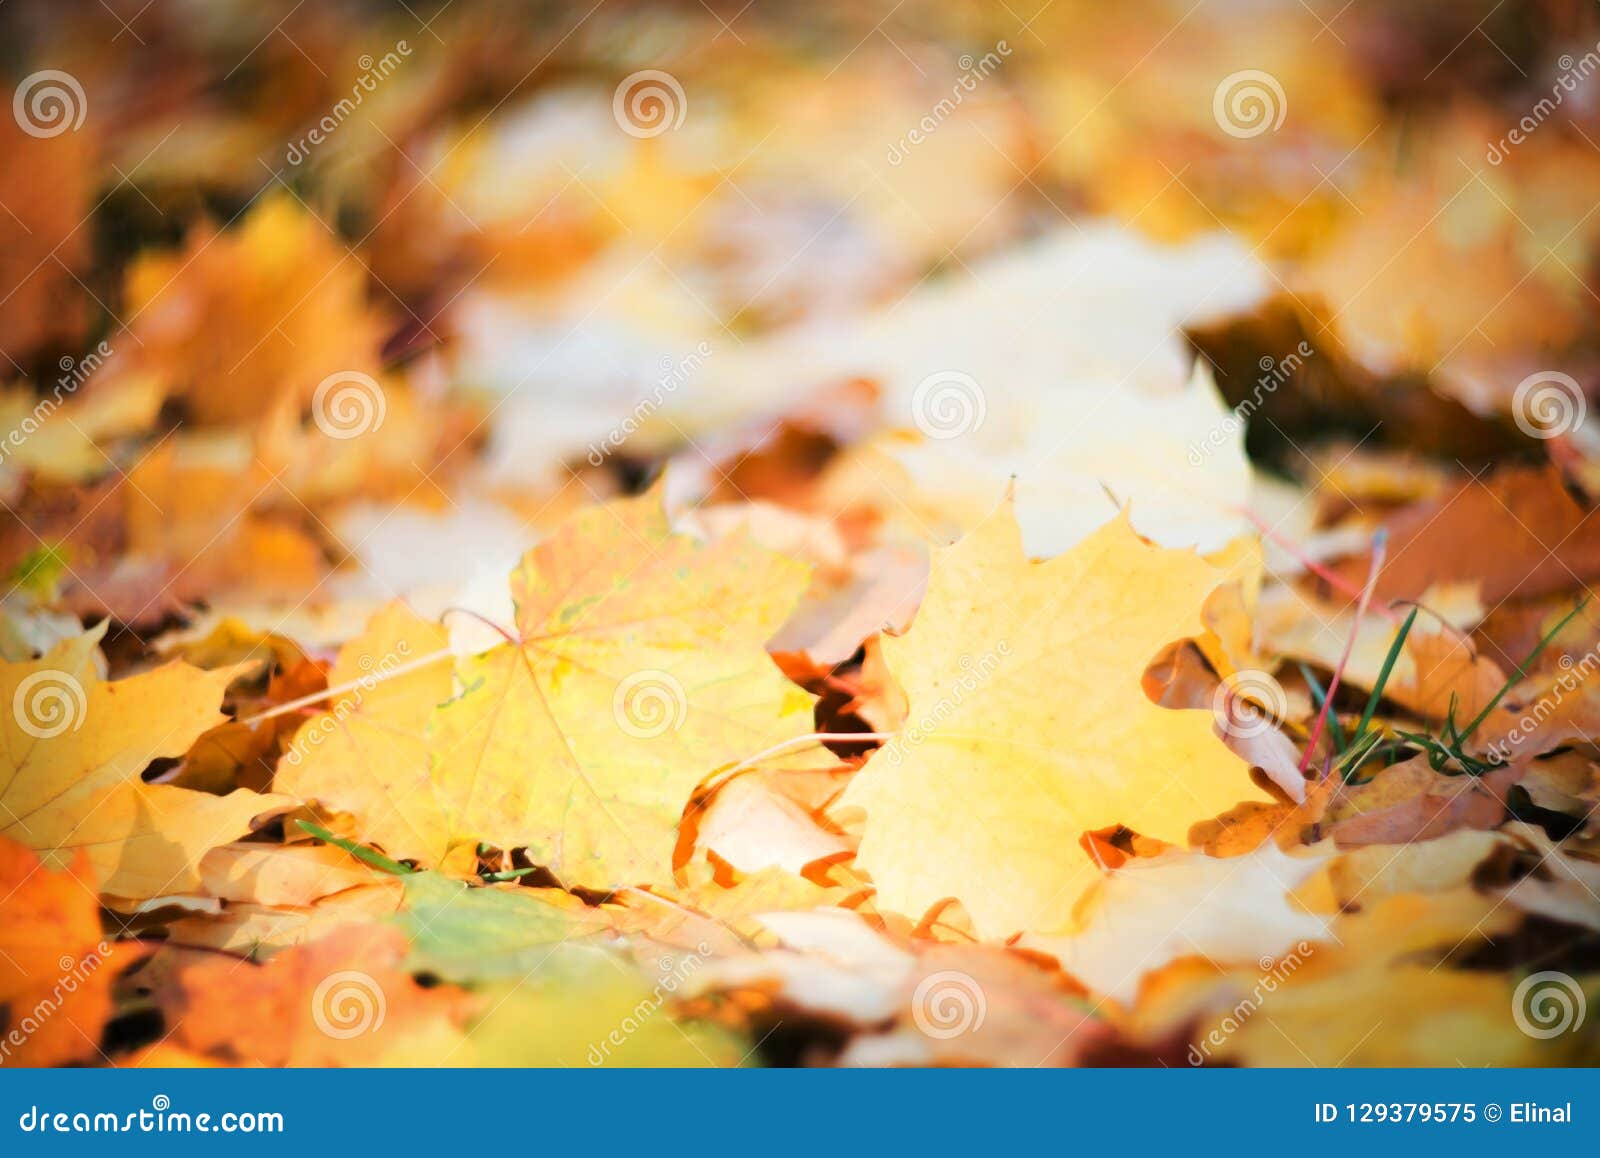 Maples Autumn Golden Fall Background Stock Image - Image of autumn